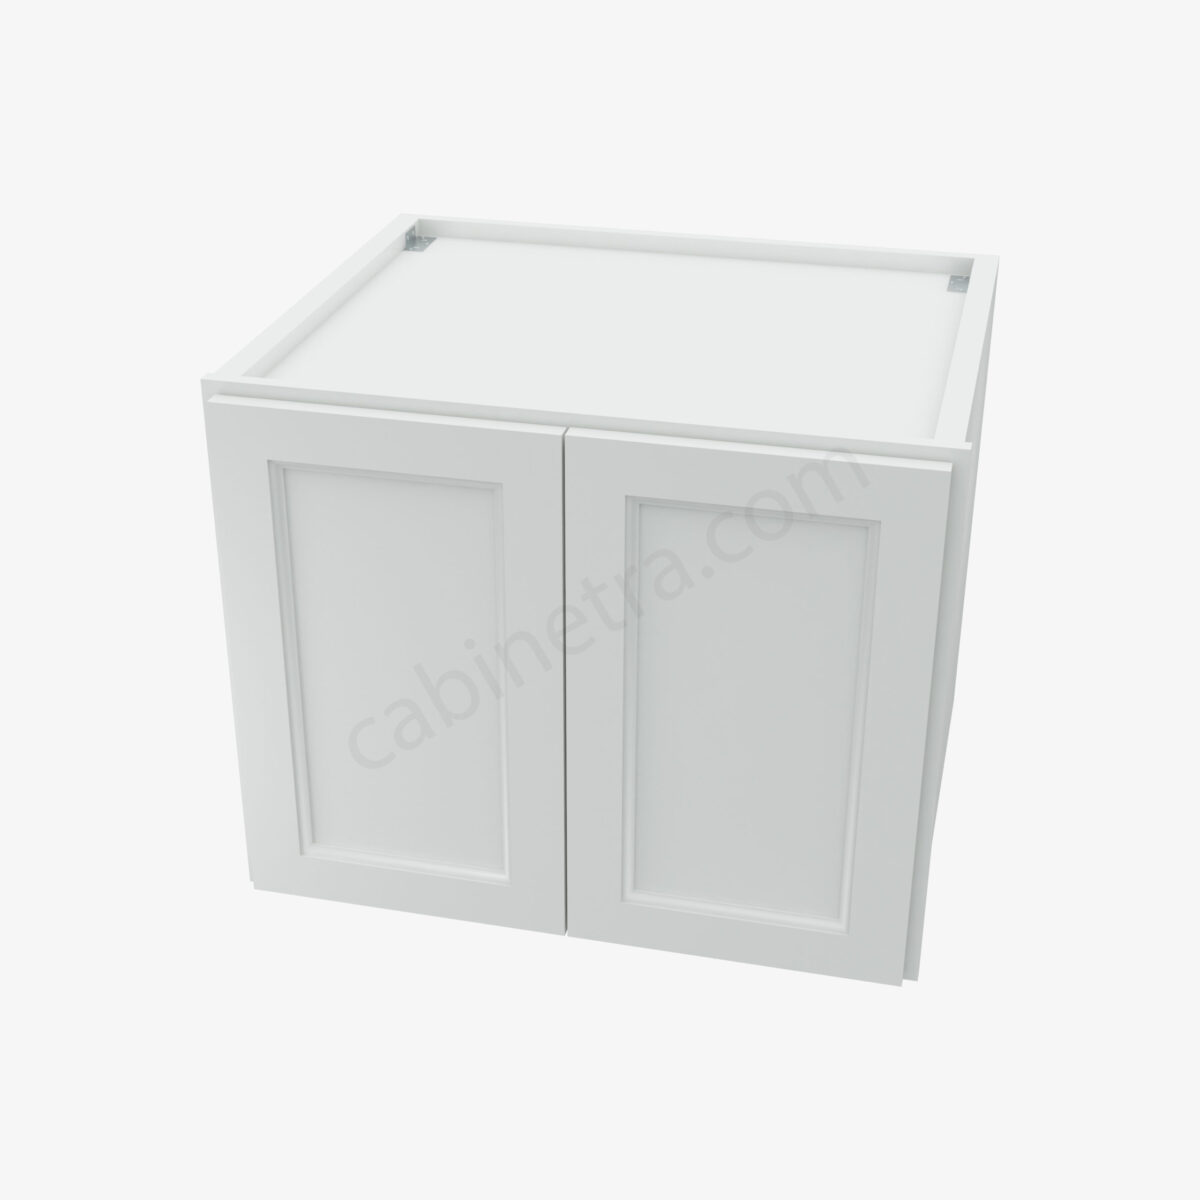 TW W302424B 3 Forevermark Uptown White Cabinetra scaled